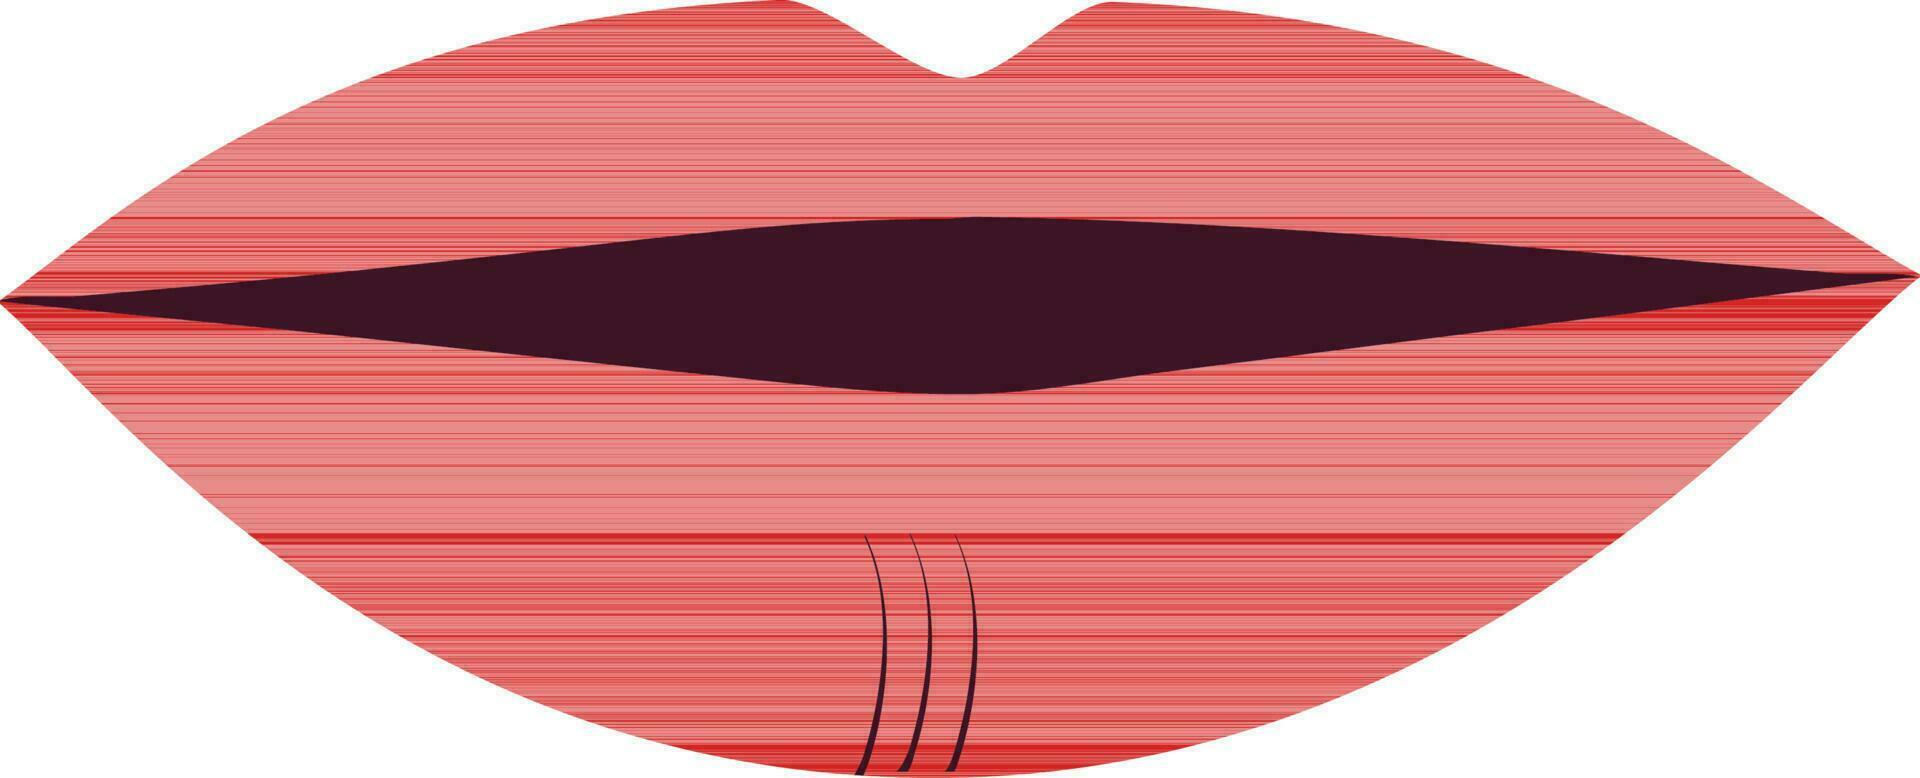 Red color of  lips icon in illustration. vector